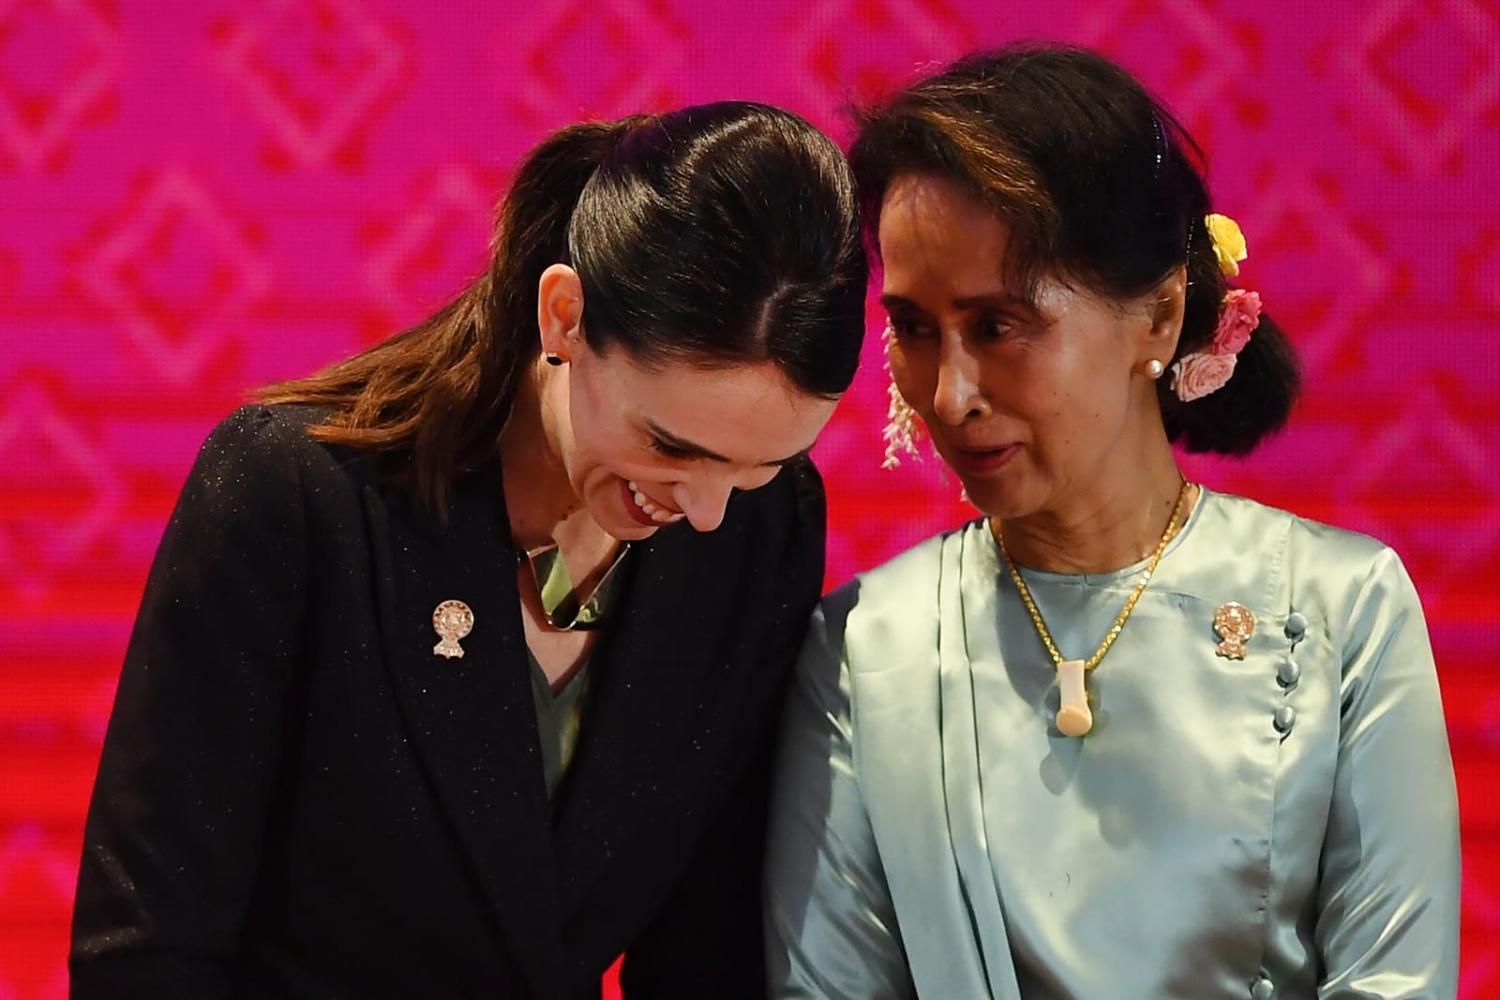 Then leaders: New Zealand's Prime Minister Jacinda Ardern alongside Myanmar's State Counsellor Aung San Suu Kyi during the 2019 East Asia Summit in Bangkok (Manan Vatsyayana/AFP via Getty Images)